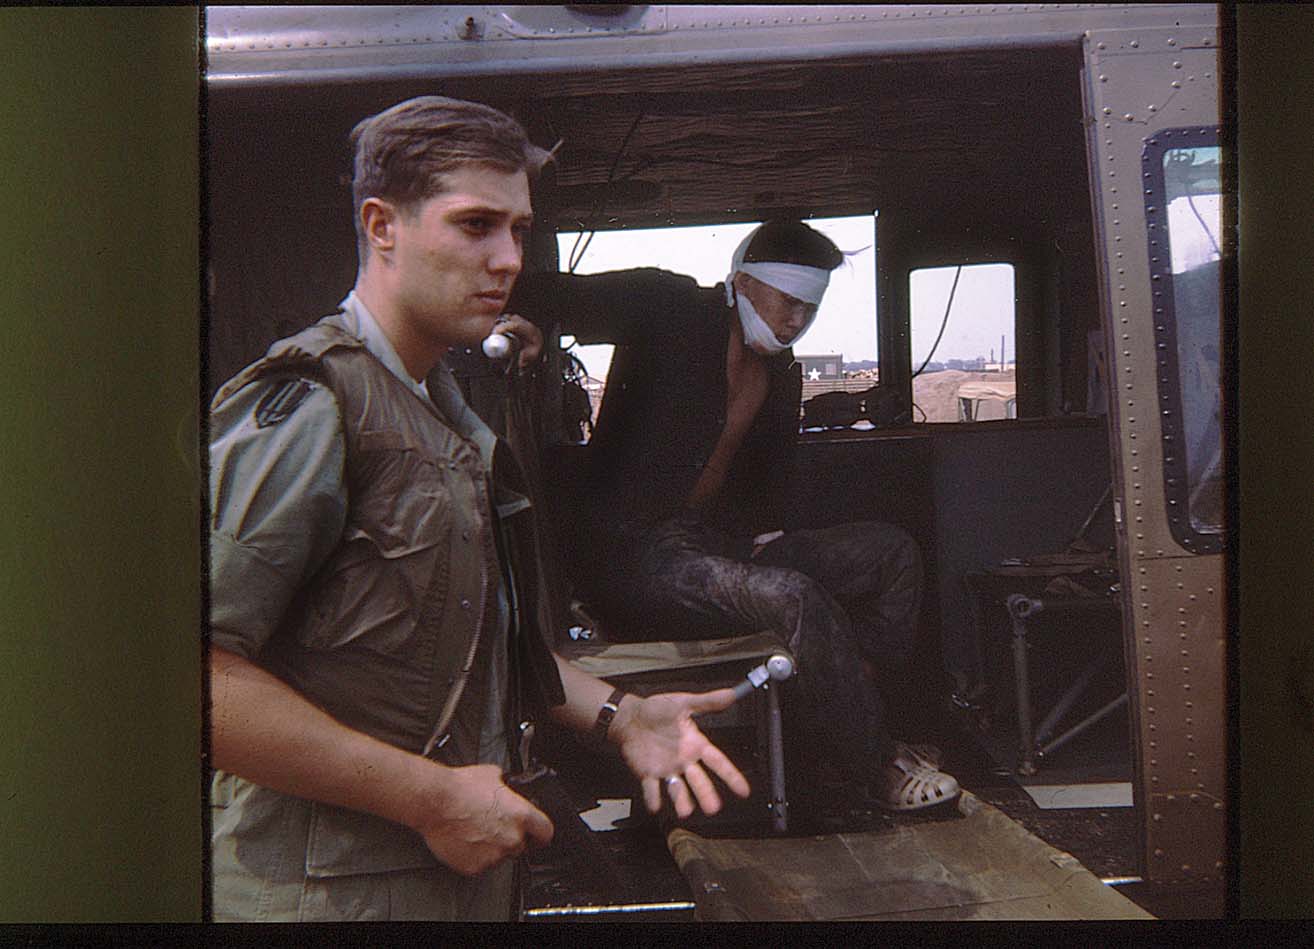 Lutz escorts a captured Viet Cong from a helicopter at Xuan Loc in 1969, when he served as an adviser to the intelligence staff of South Vietnam’s 18th Infantry Division. / Courtesy photo